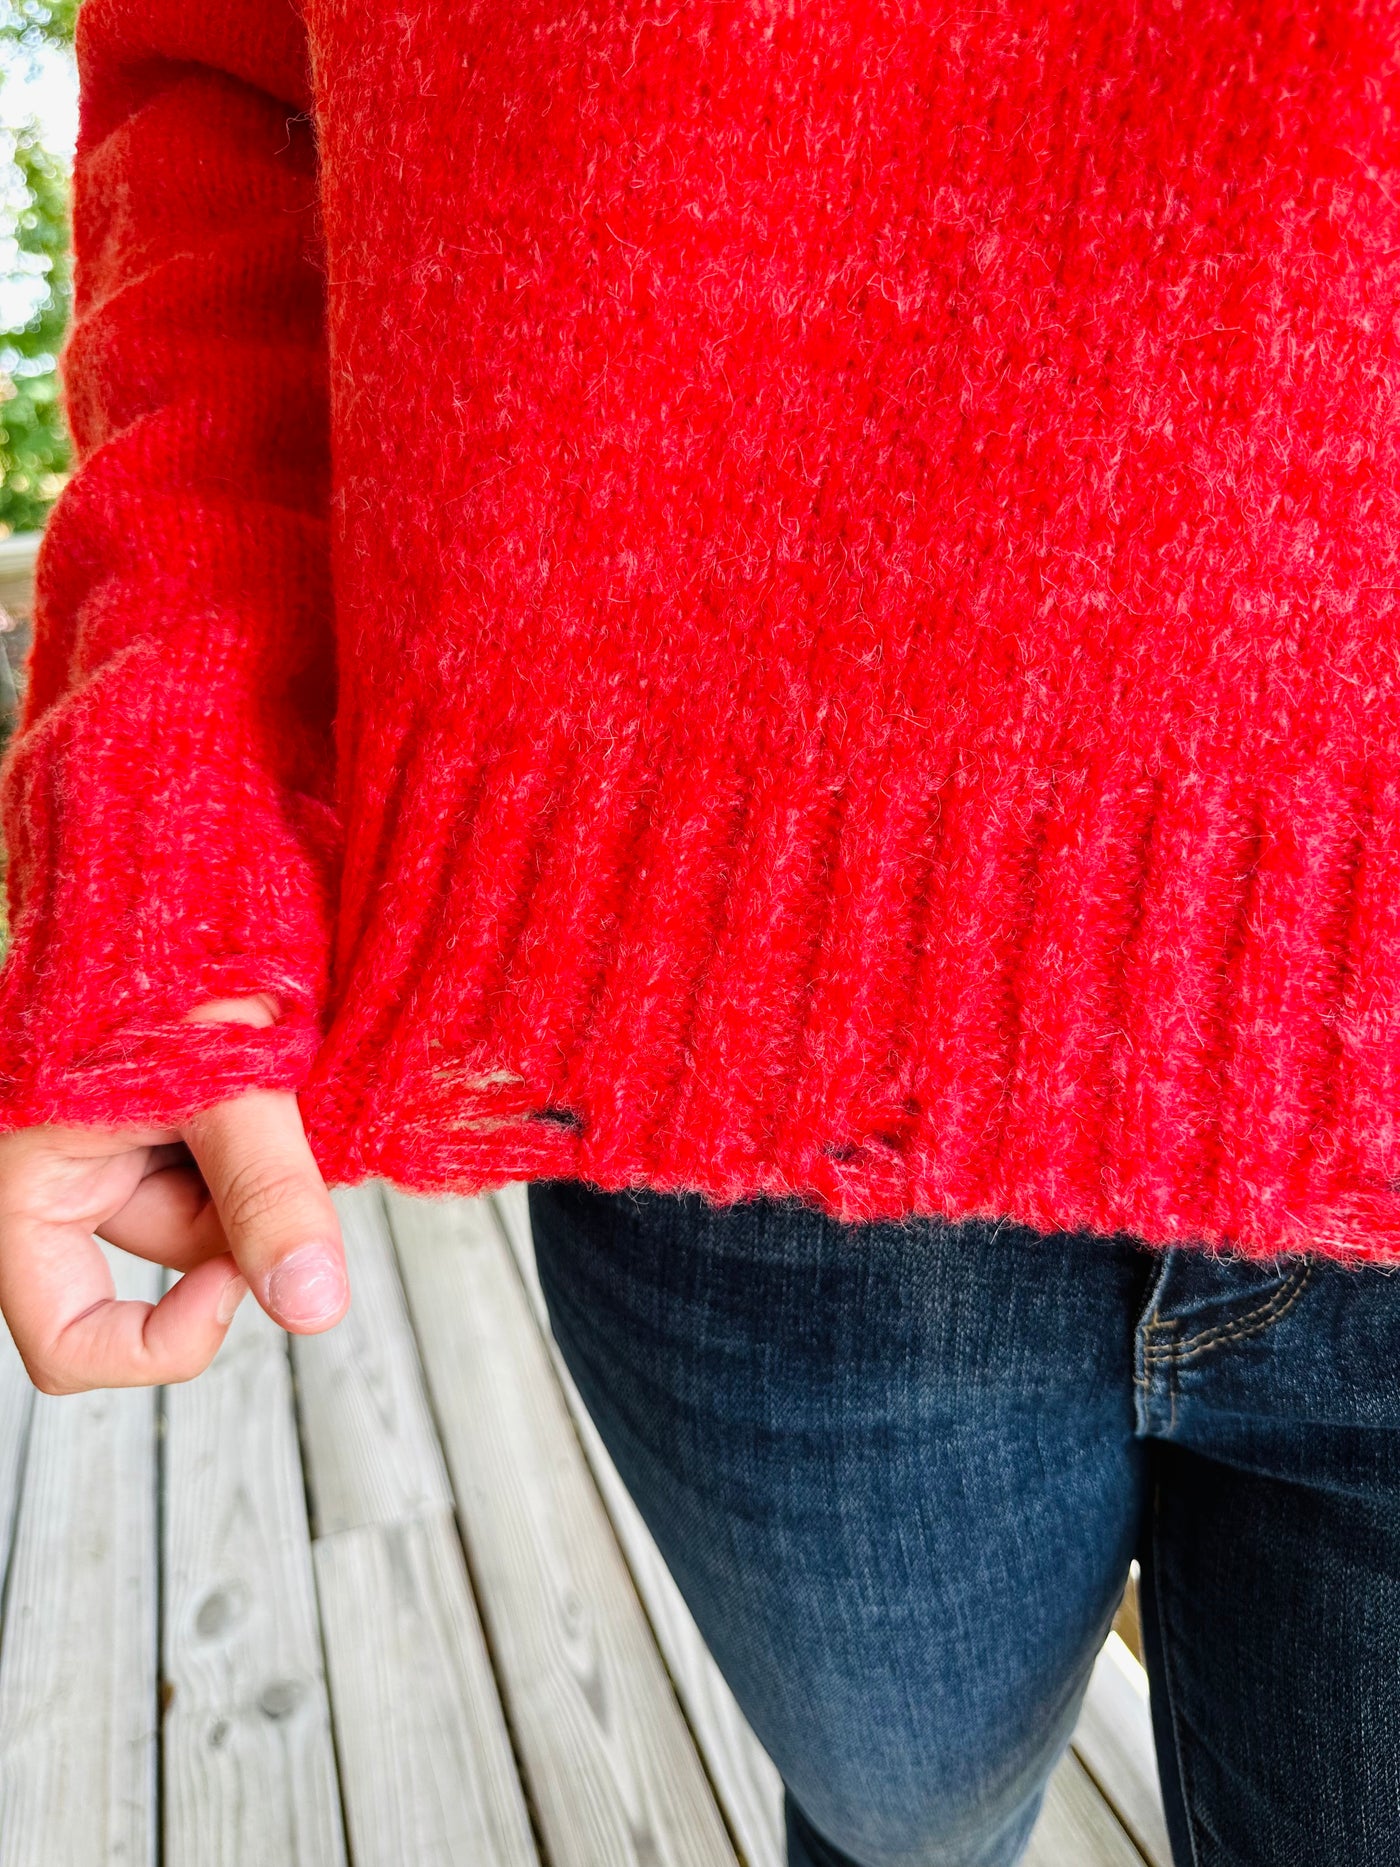 Red Mock Neck Solid Cozy Sweater Top w/ Distressed Hem Final Sale